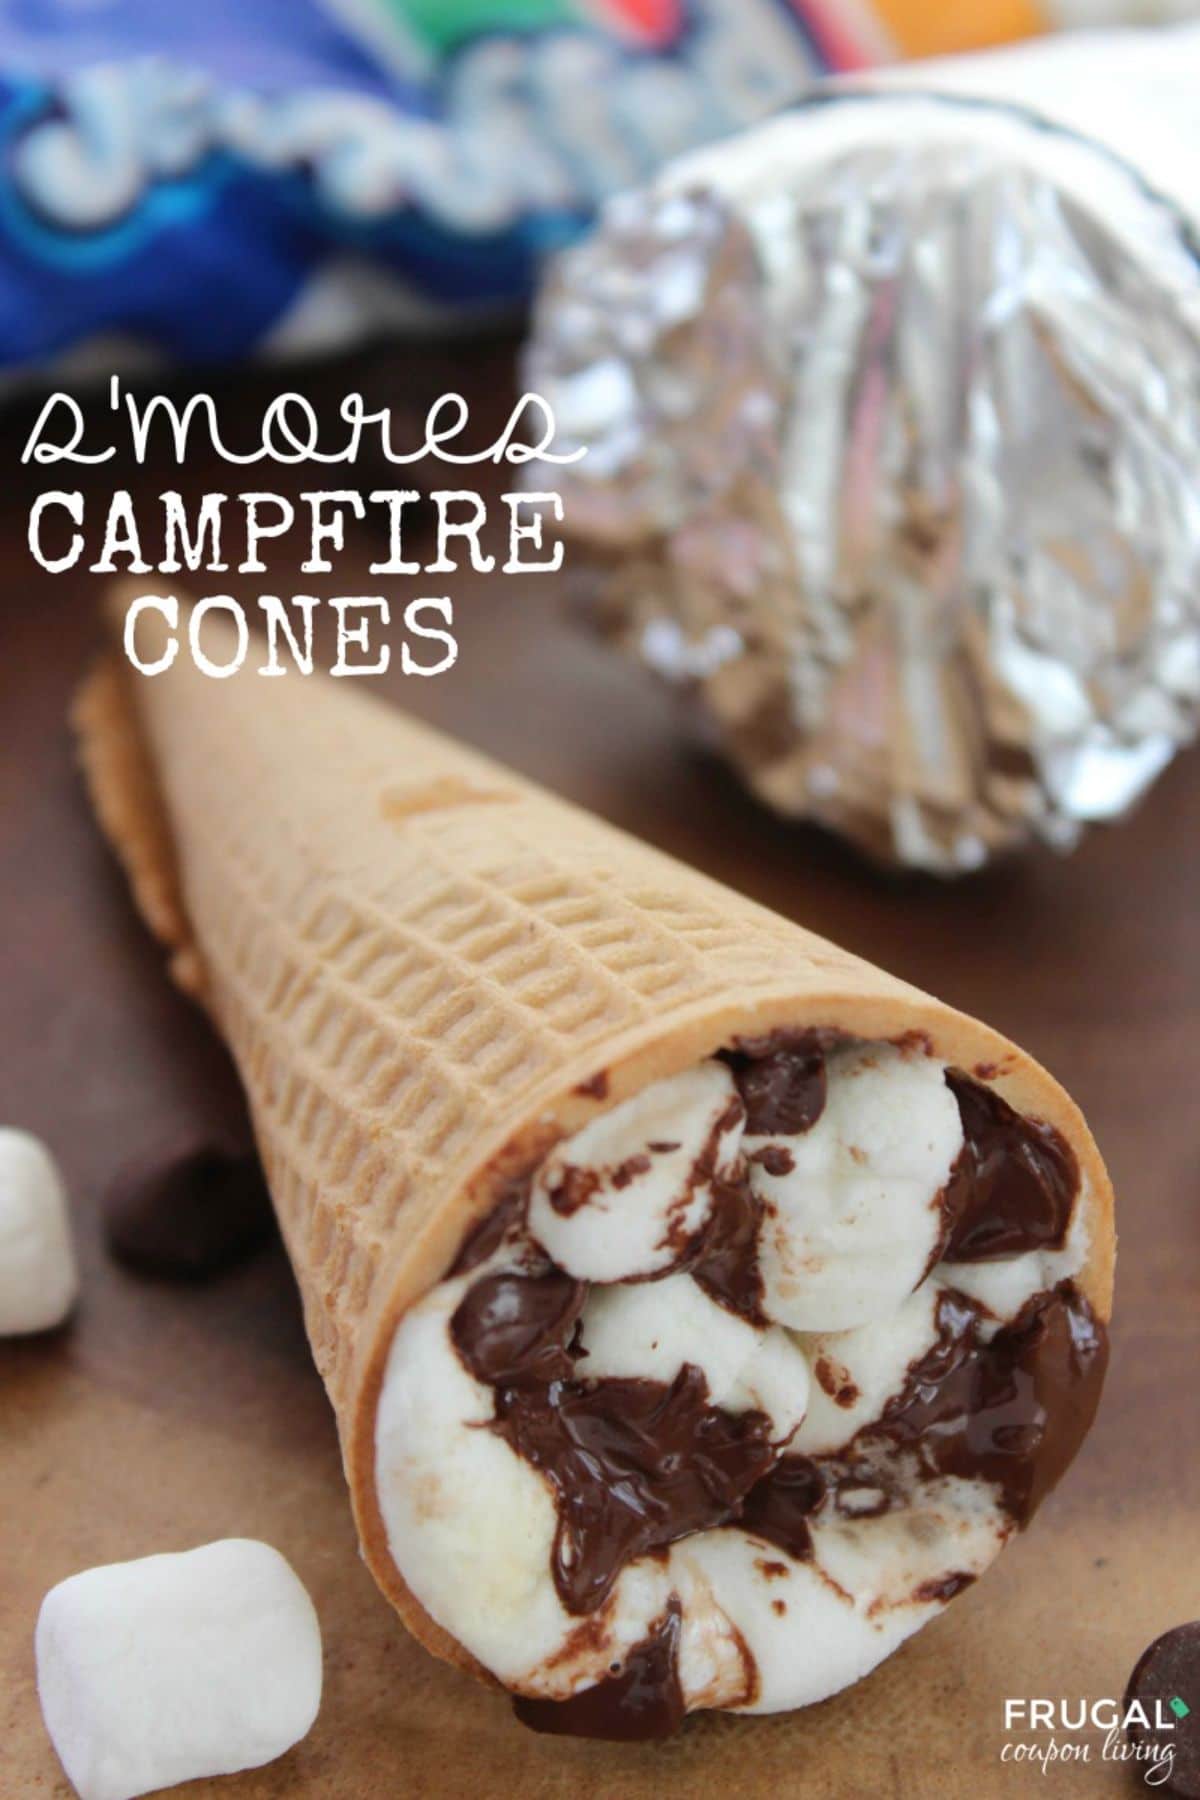 the test reads "Smores campfire cones" the image is of an ice-cream cone filled with chocolate and marshmallow